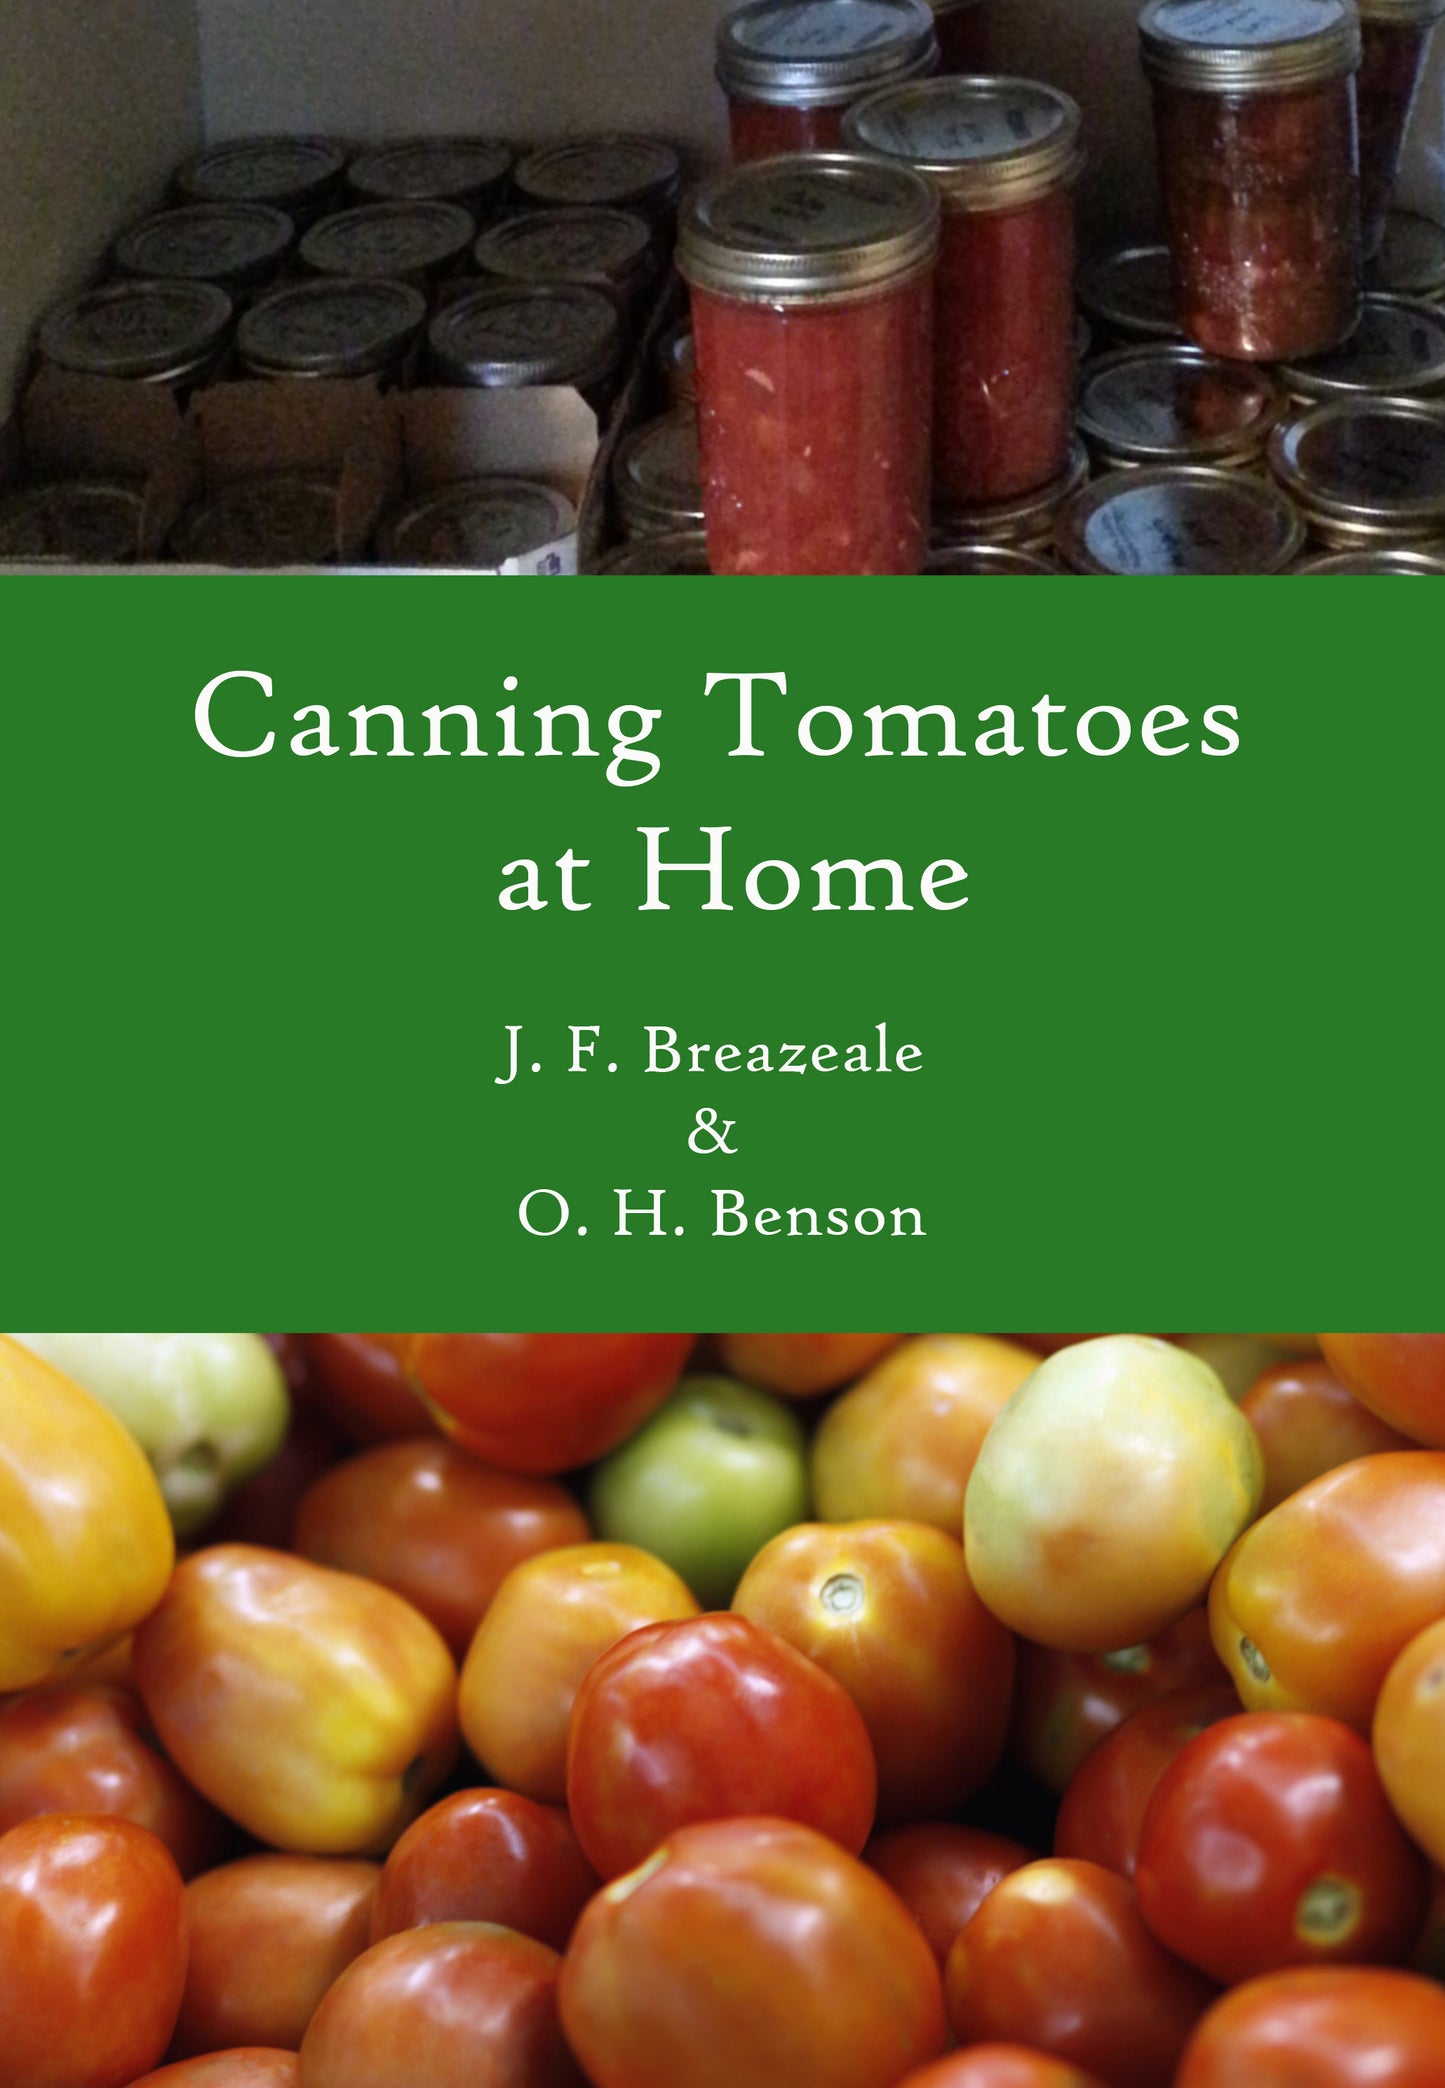 Canning Tomatoes at Home